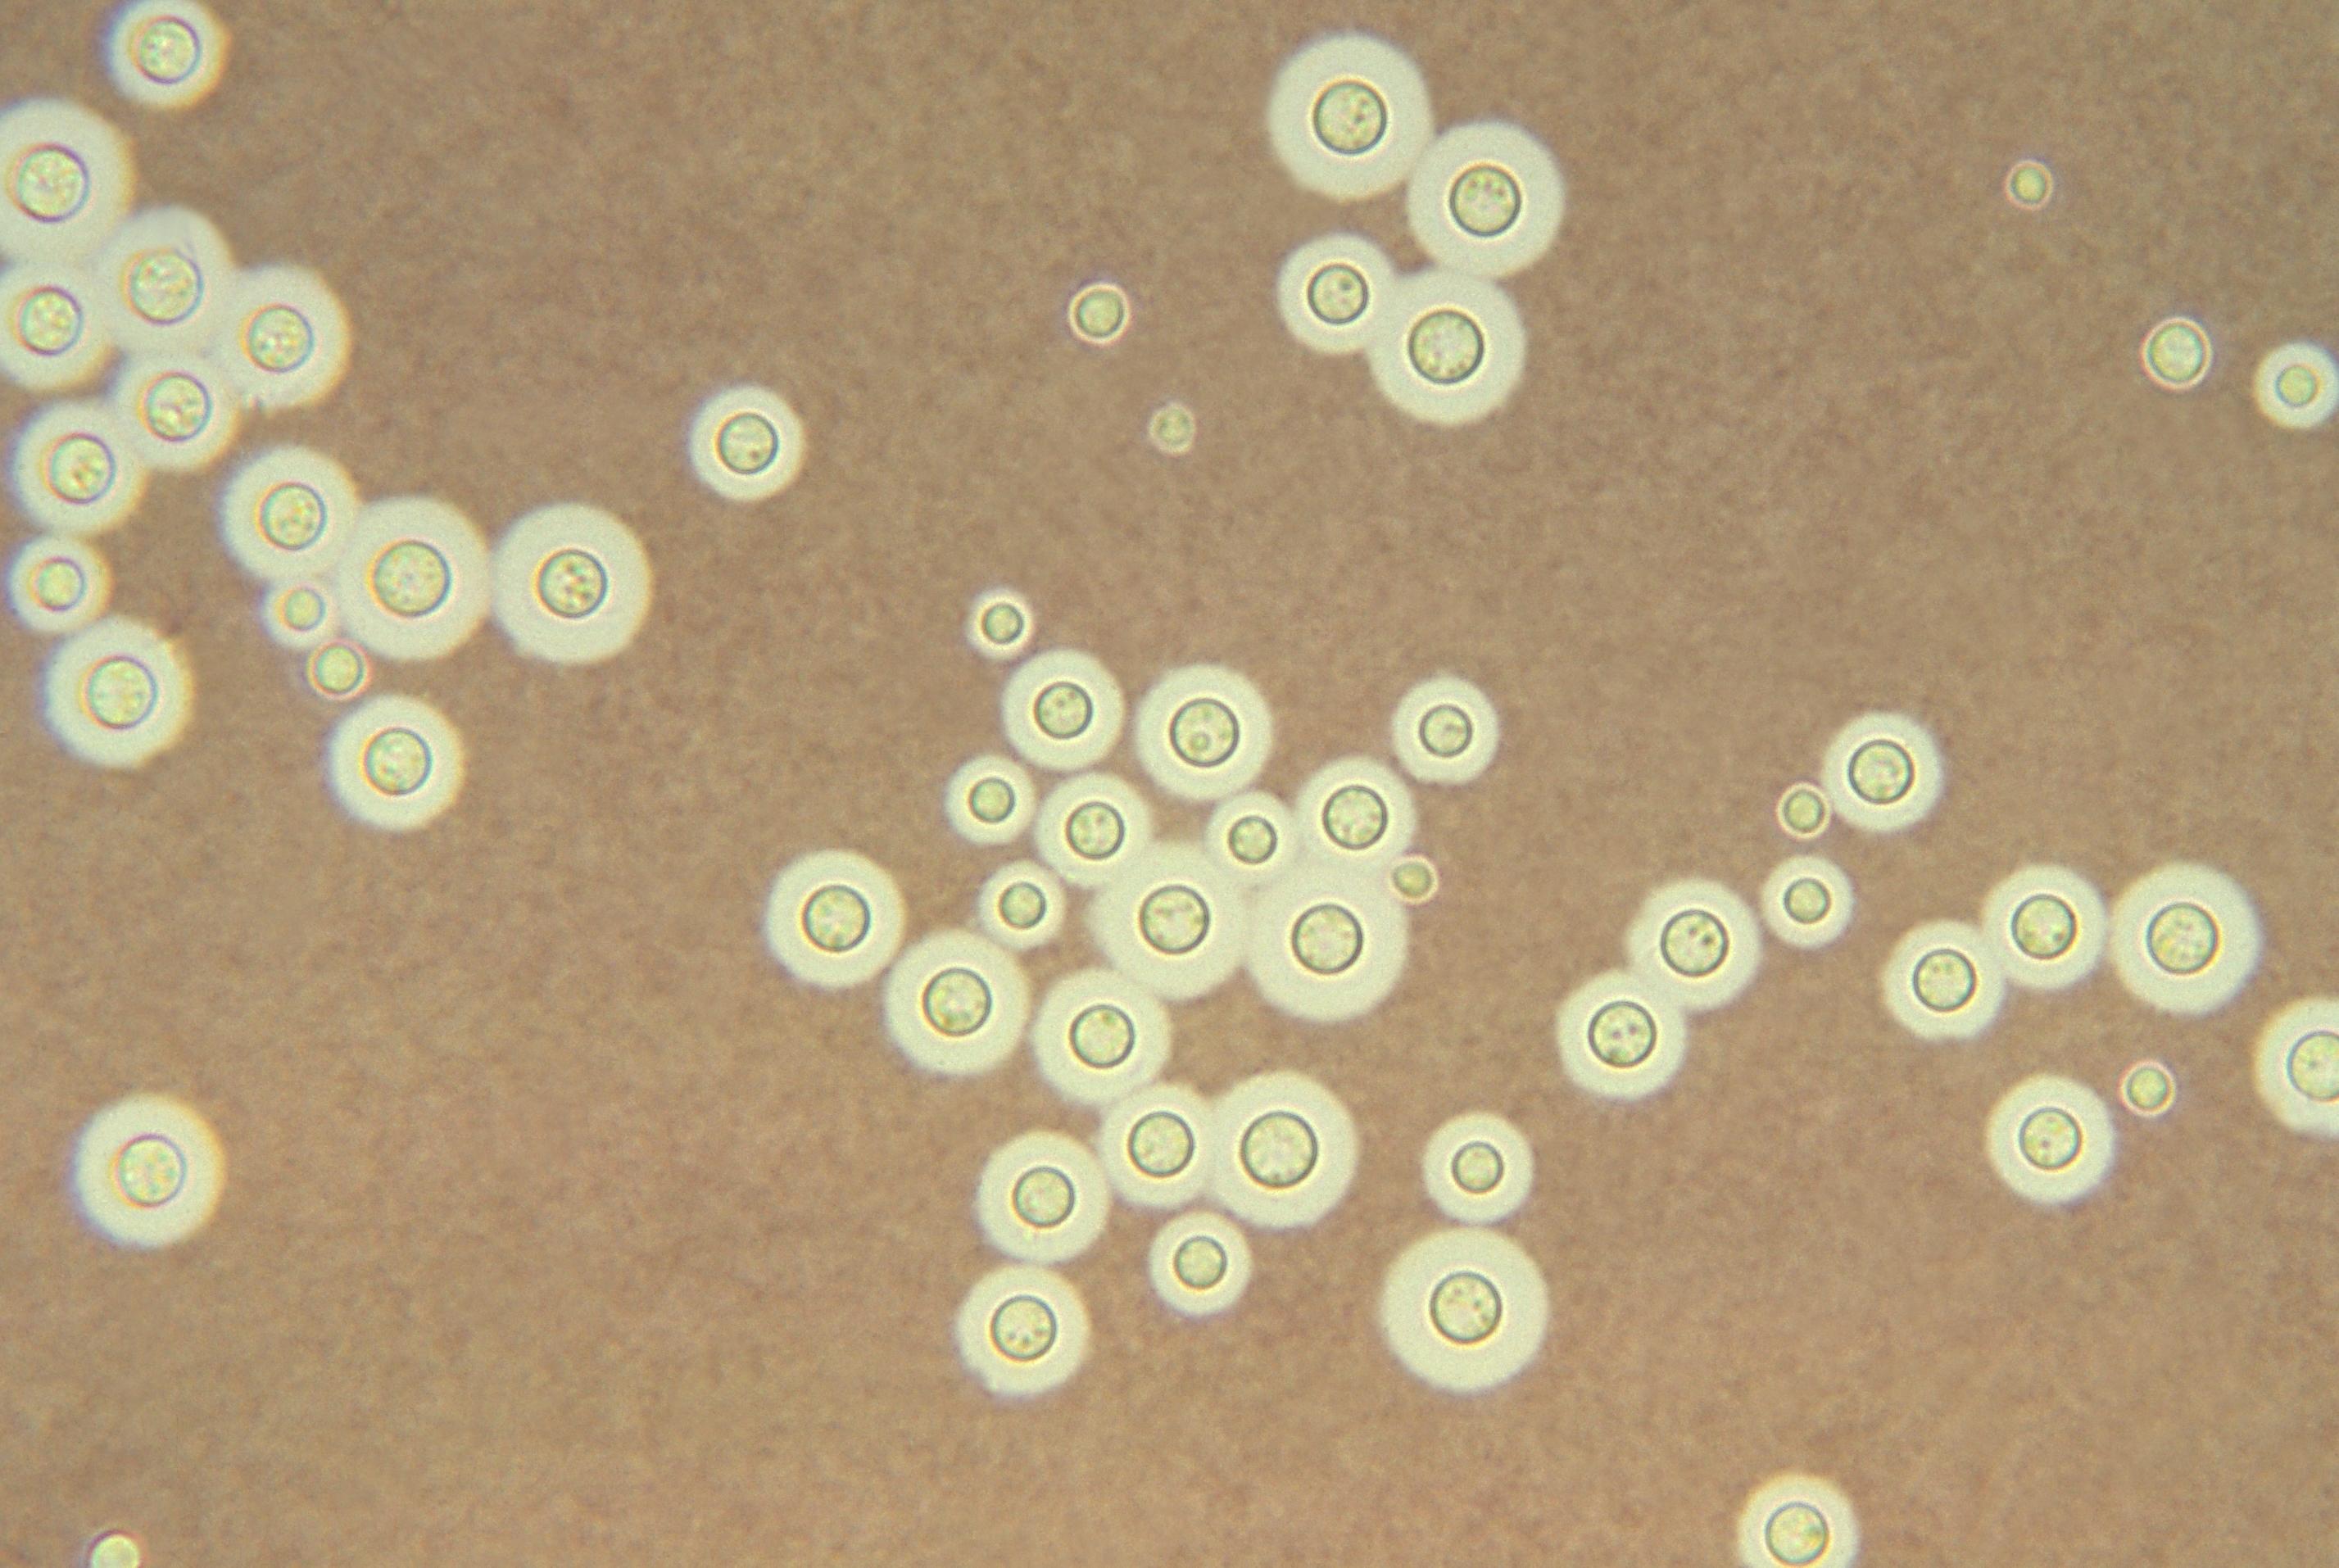 Photomicrograph of an India ink stain of encapsulated <EM>Cryptococcus 
    neoformans</EM> showing encapsulated yeast in spinal fluid.